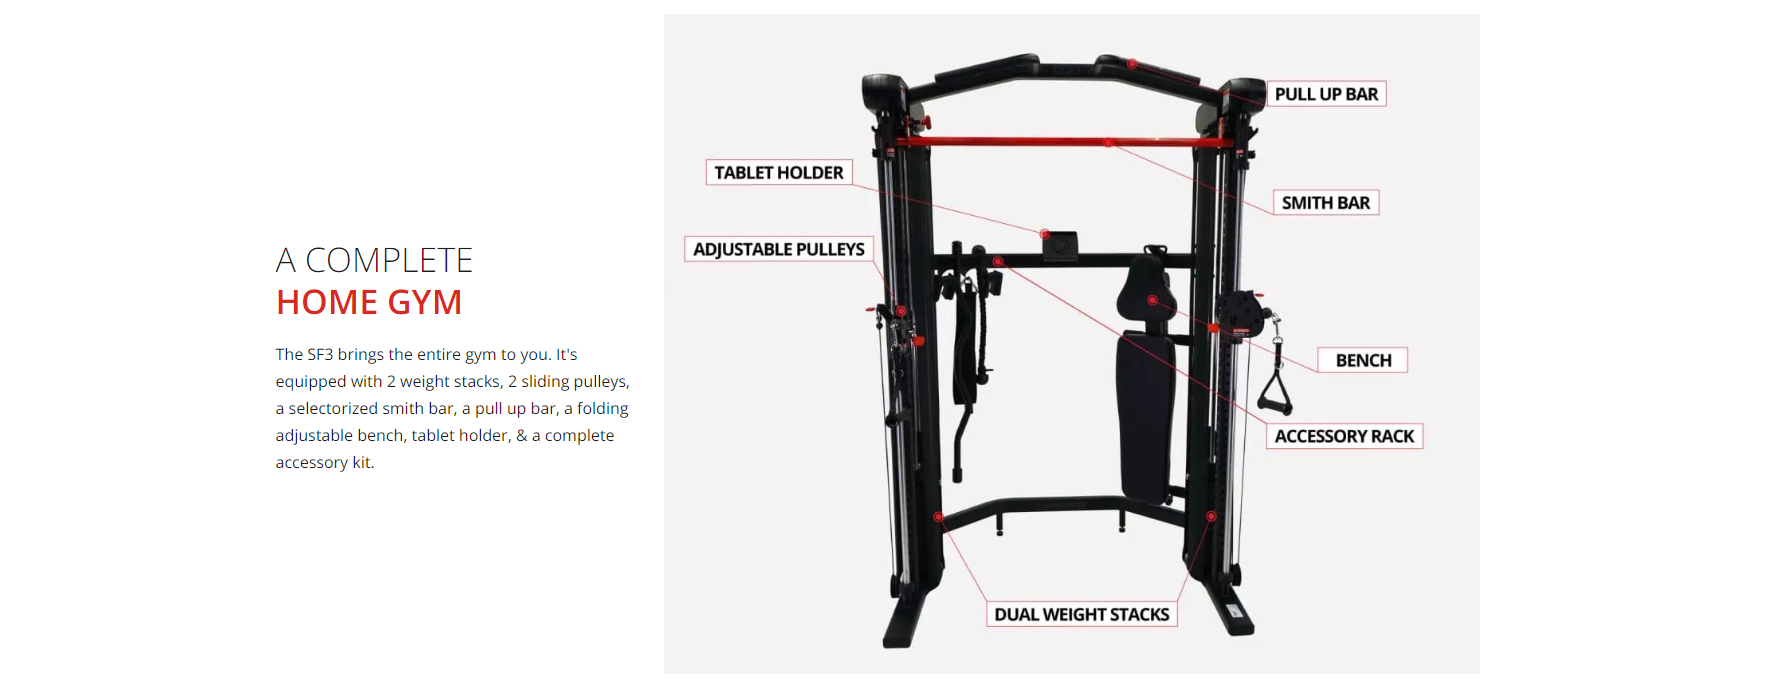 Inspire sf3 functional trainer features